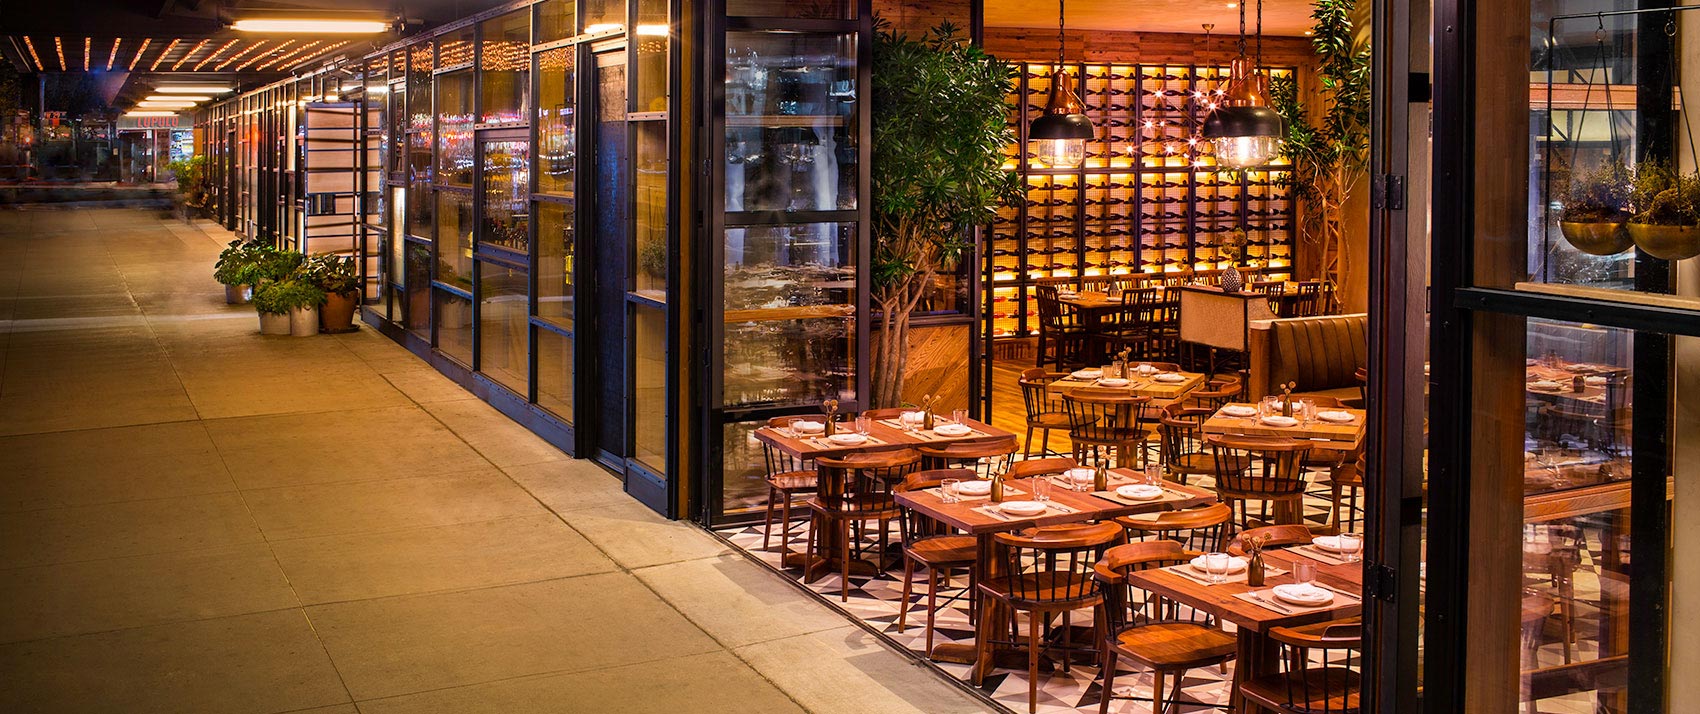 L'Amico restaurant open design with open doors and outdoor seating on sixth avenue